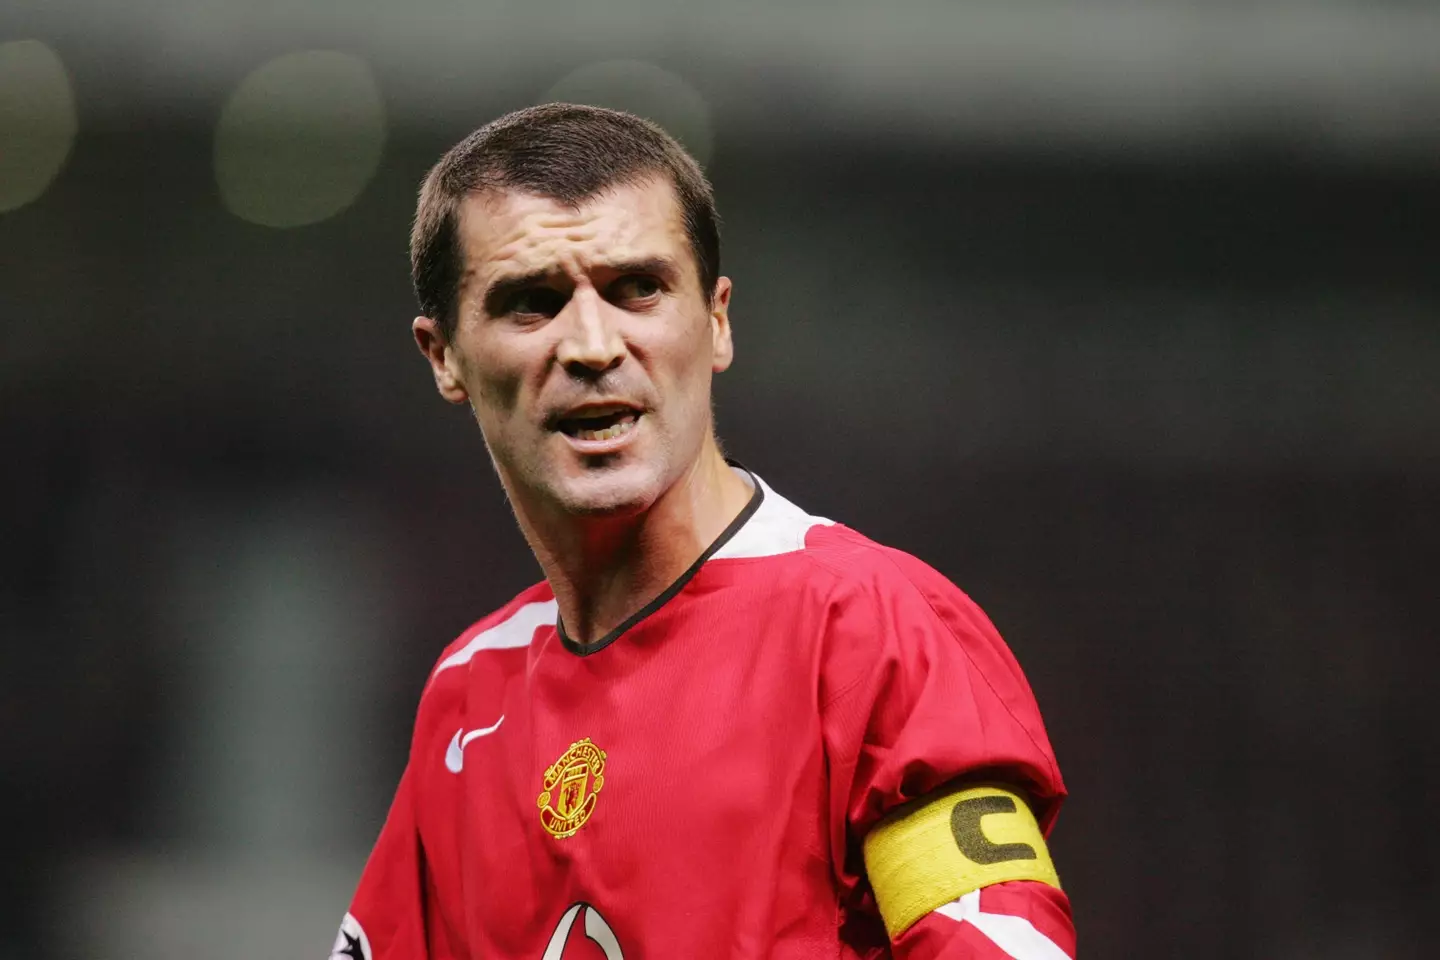 Keane during his time as a Manchester United player. (Image